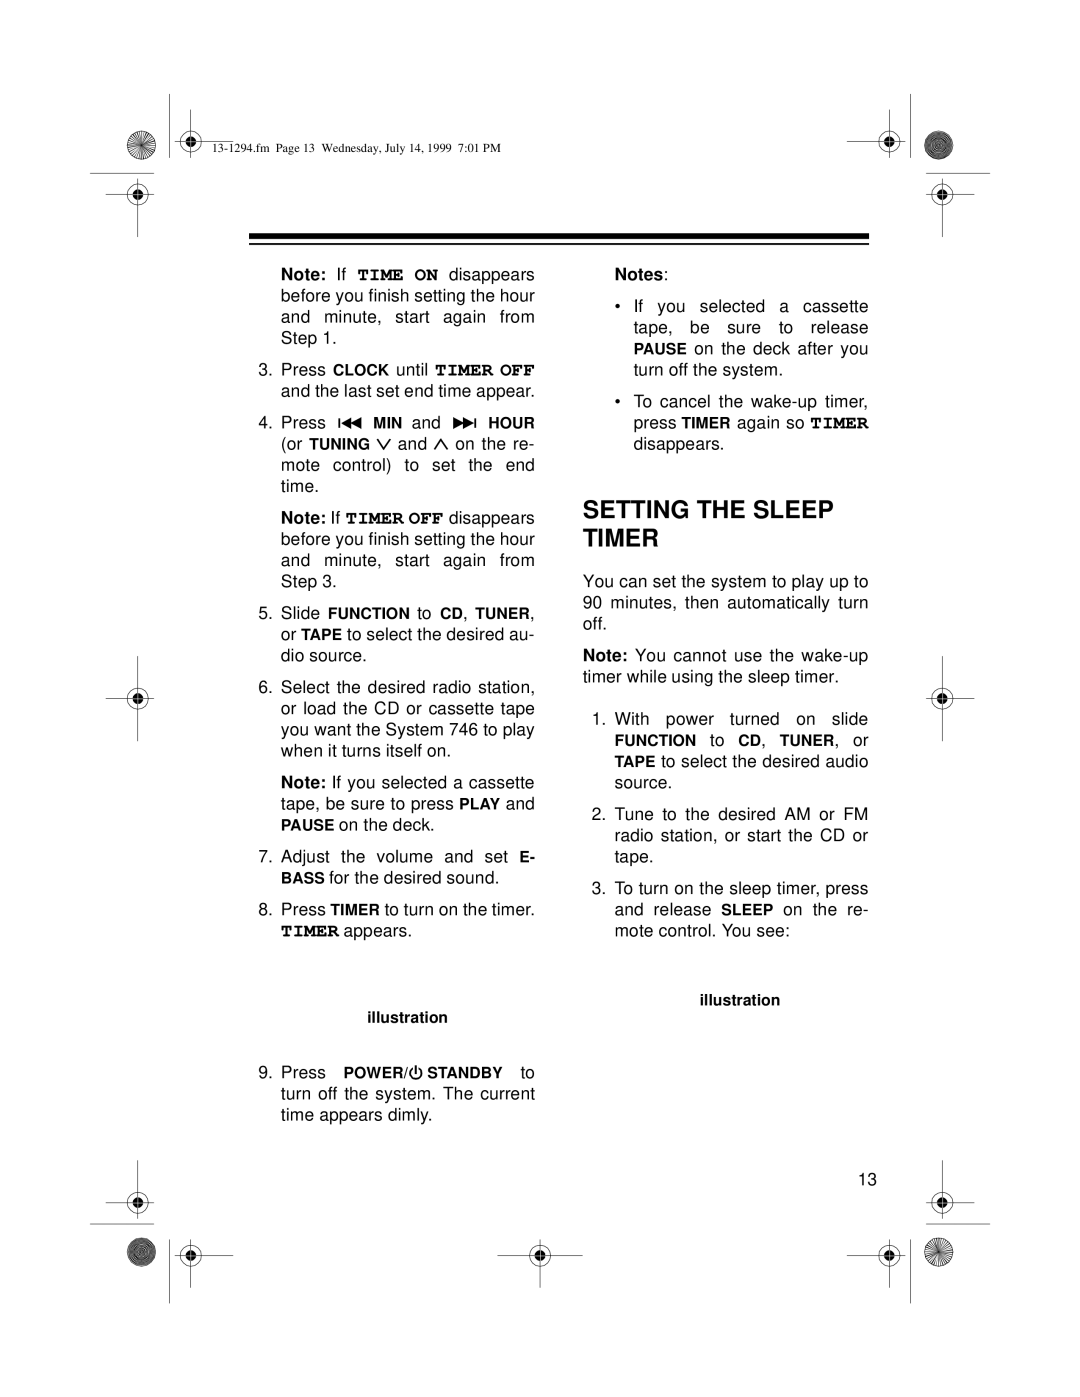 Optimus SYSTEM 746 owner manual Setting The Sleep Timer 